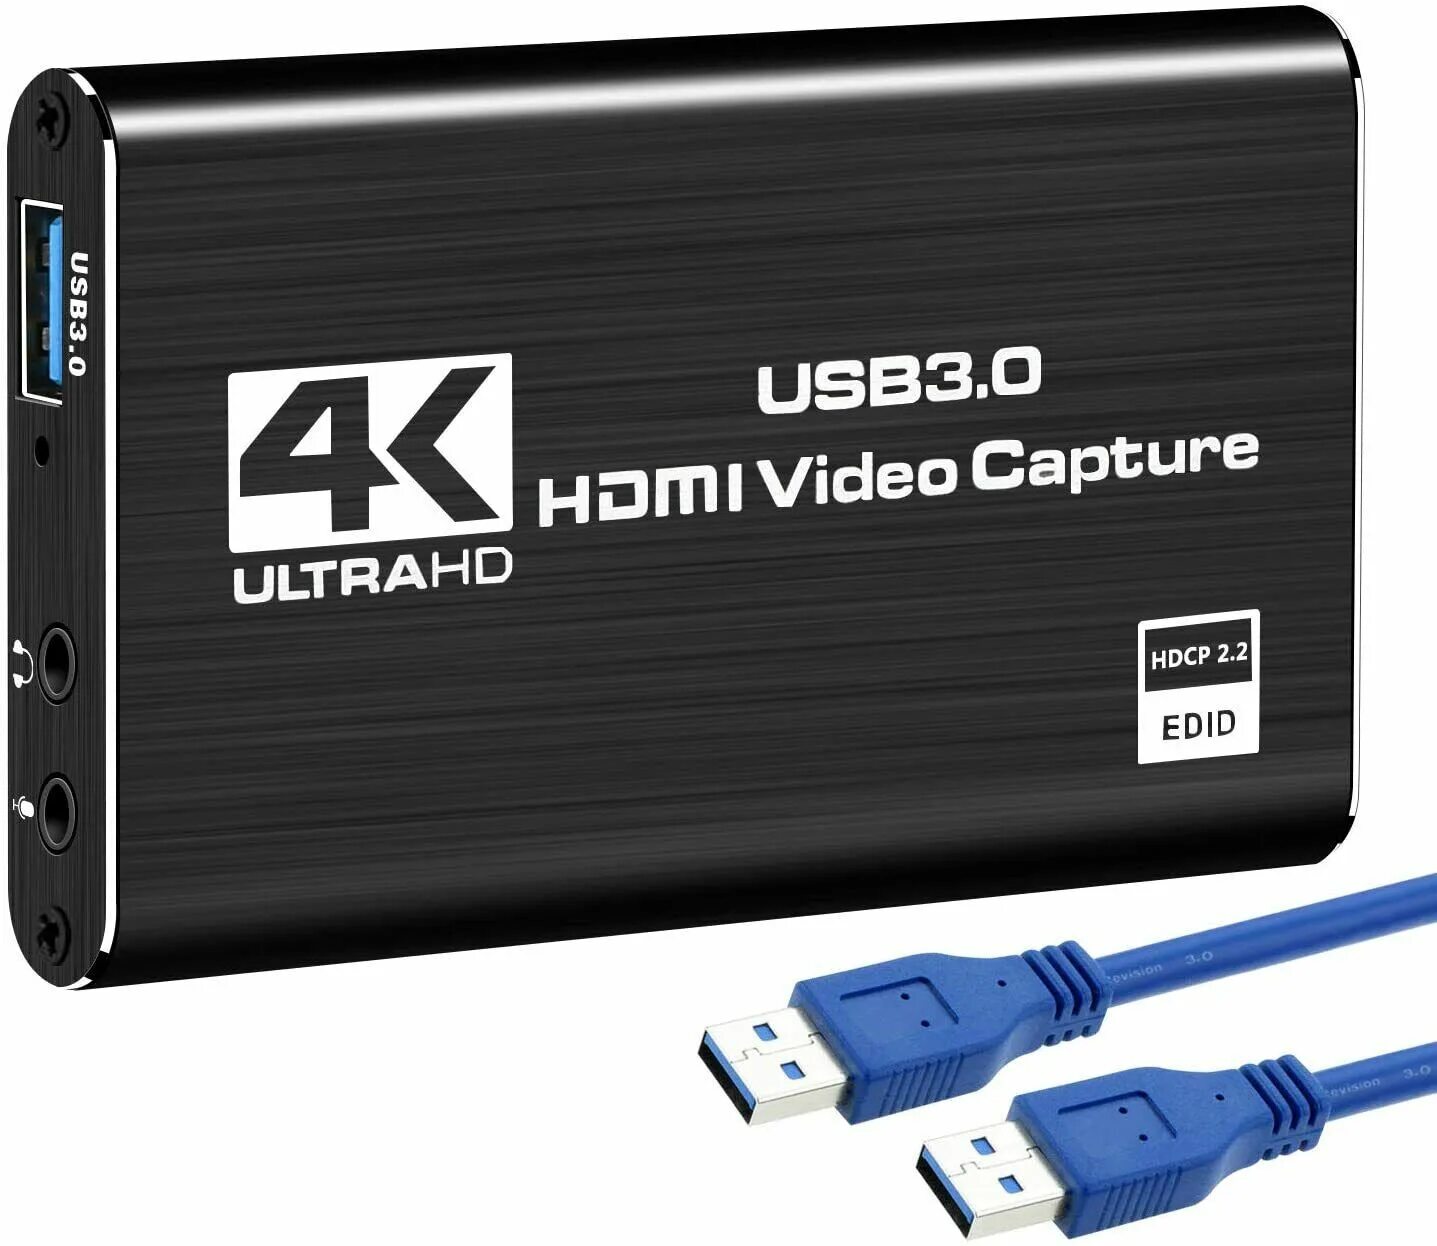 Device full. HDMI Video capture 4k. Capture Card. Palmexx Video capture. Video capture_20221031-040400.